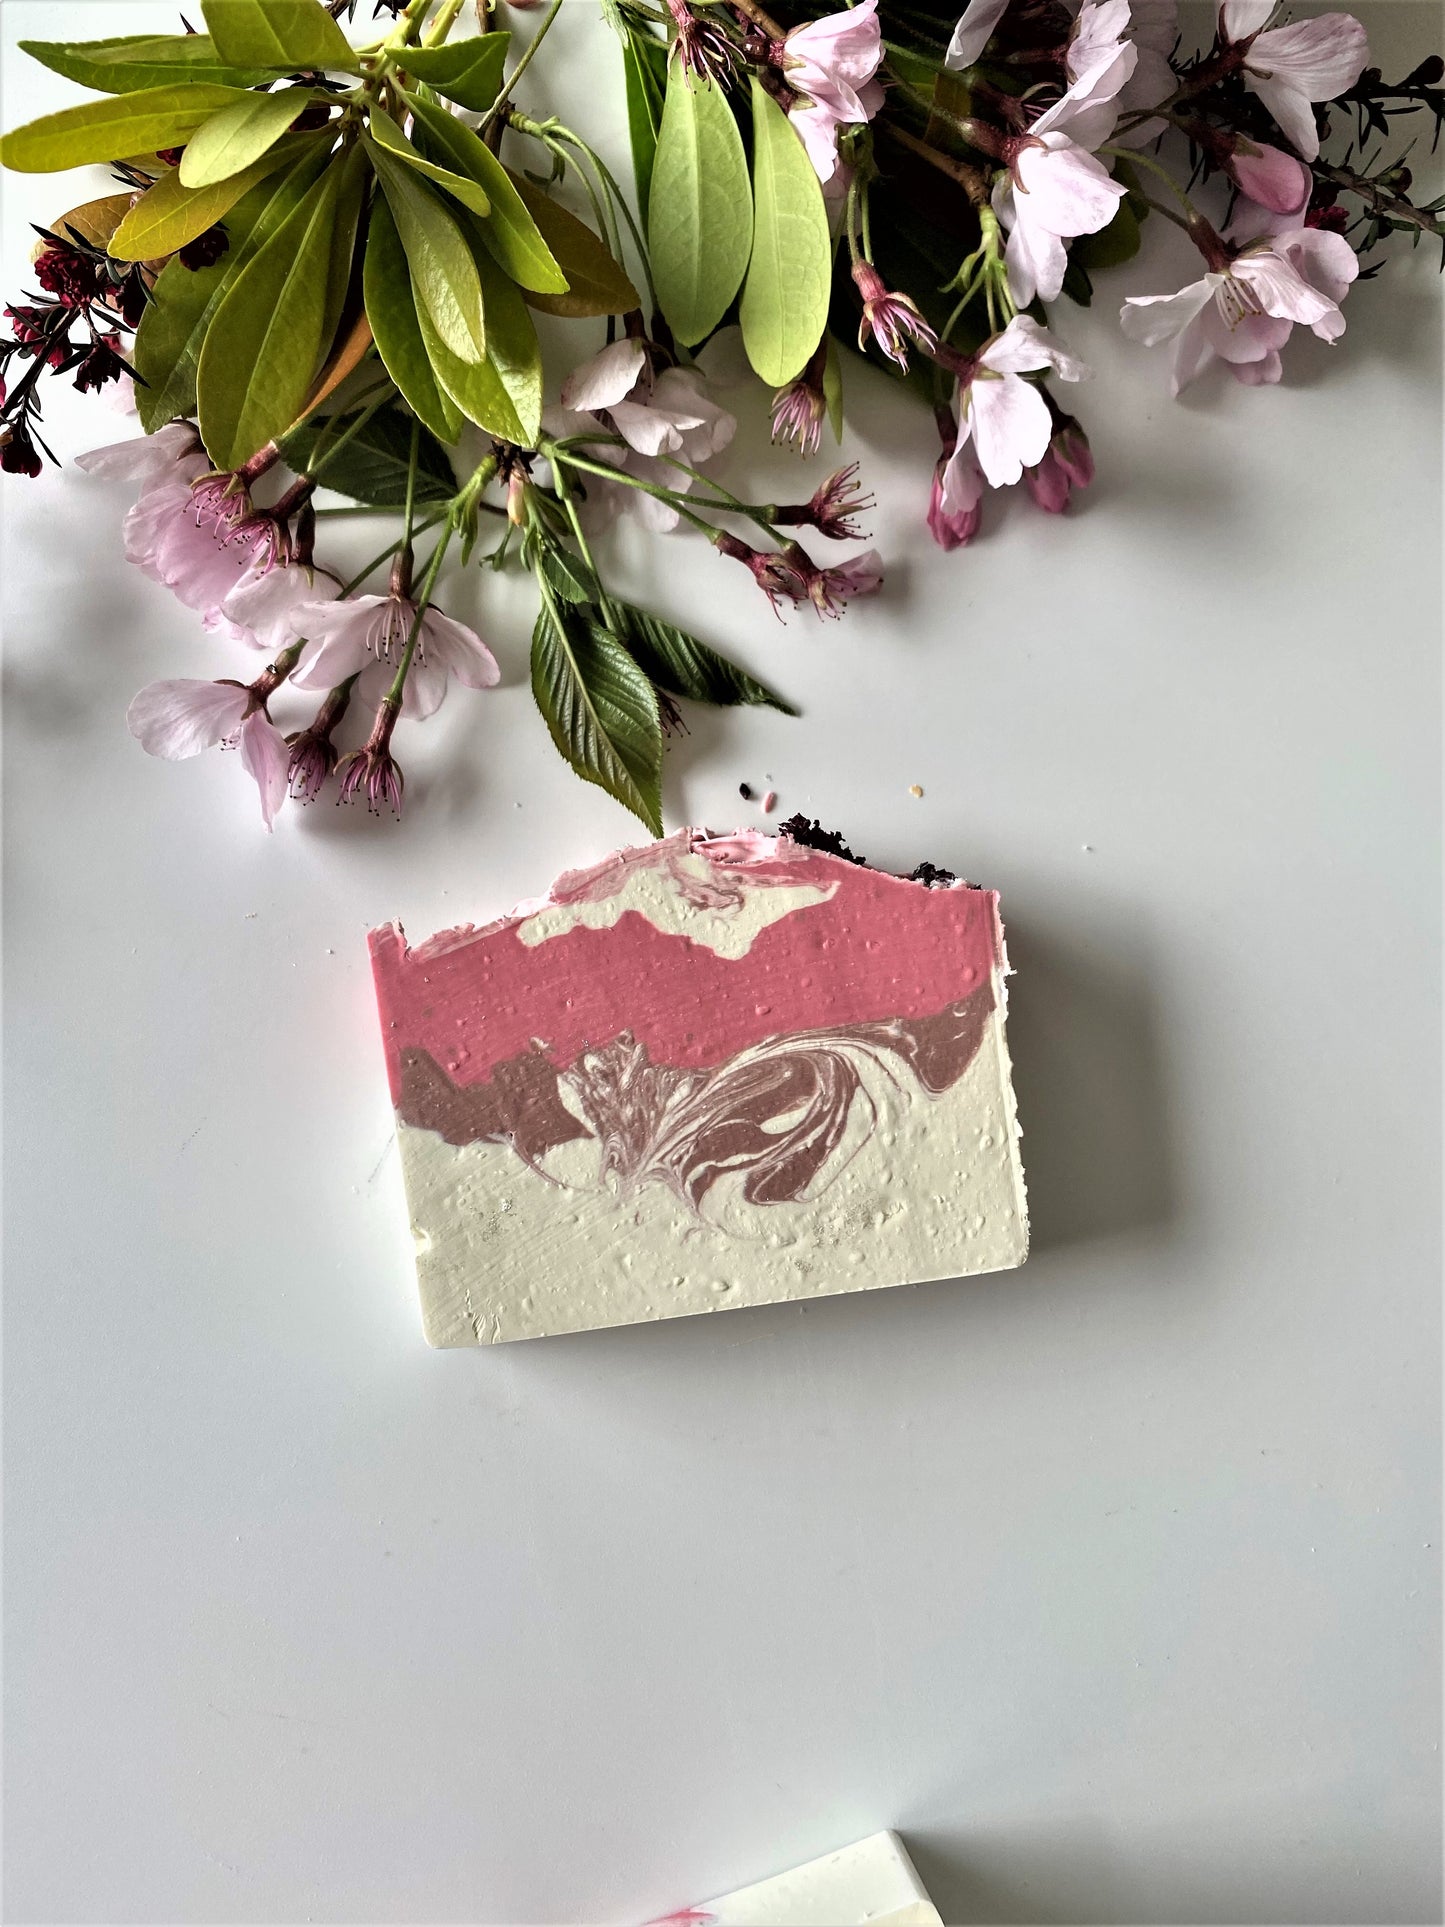 Rose & patchouli - sold out